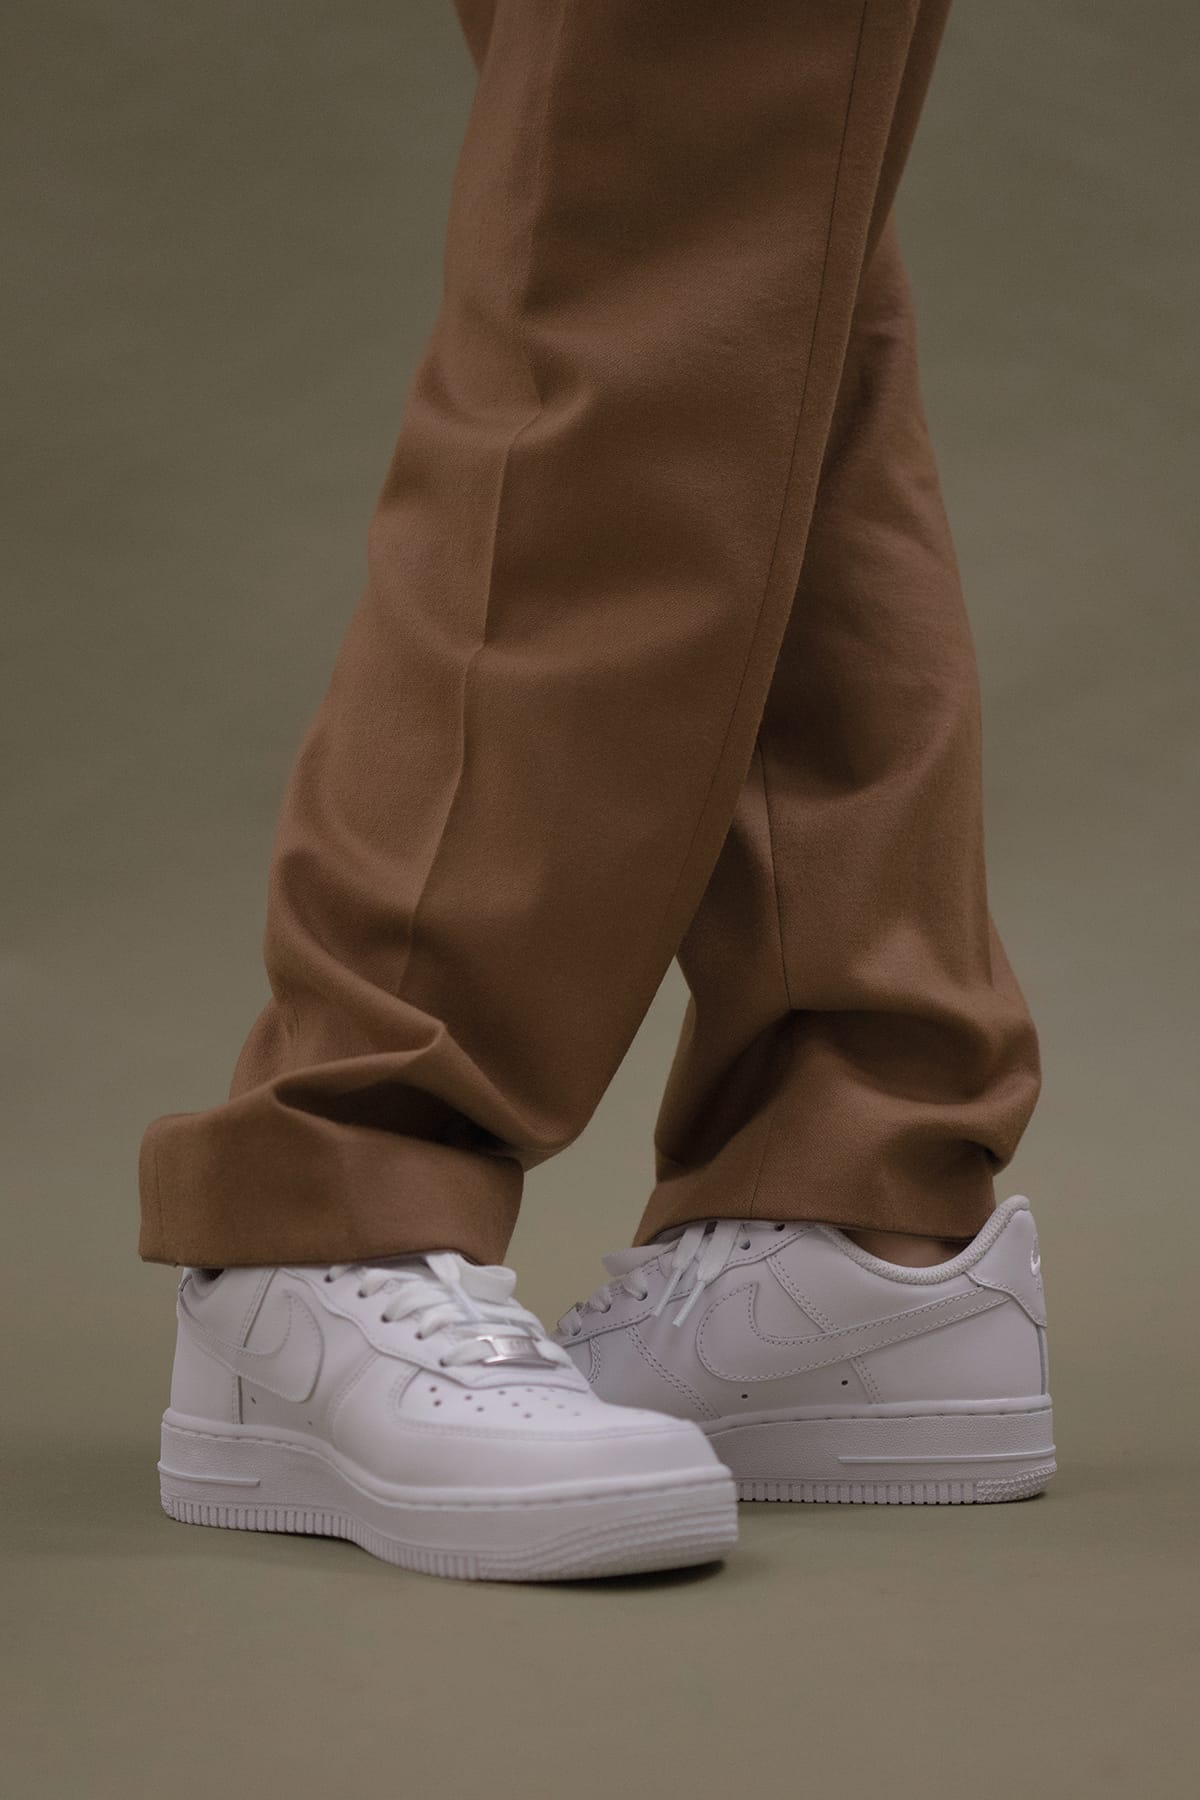 air force 1 with khaki pants